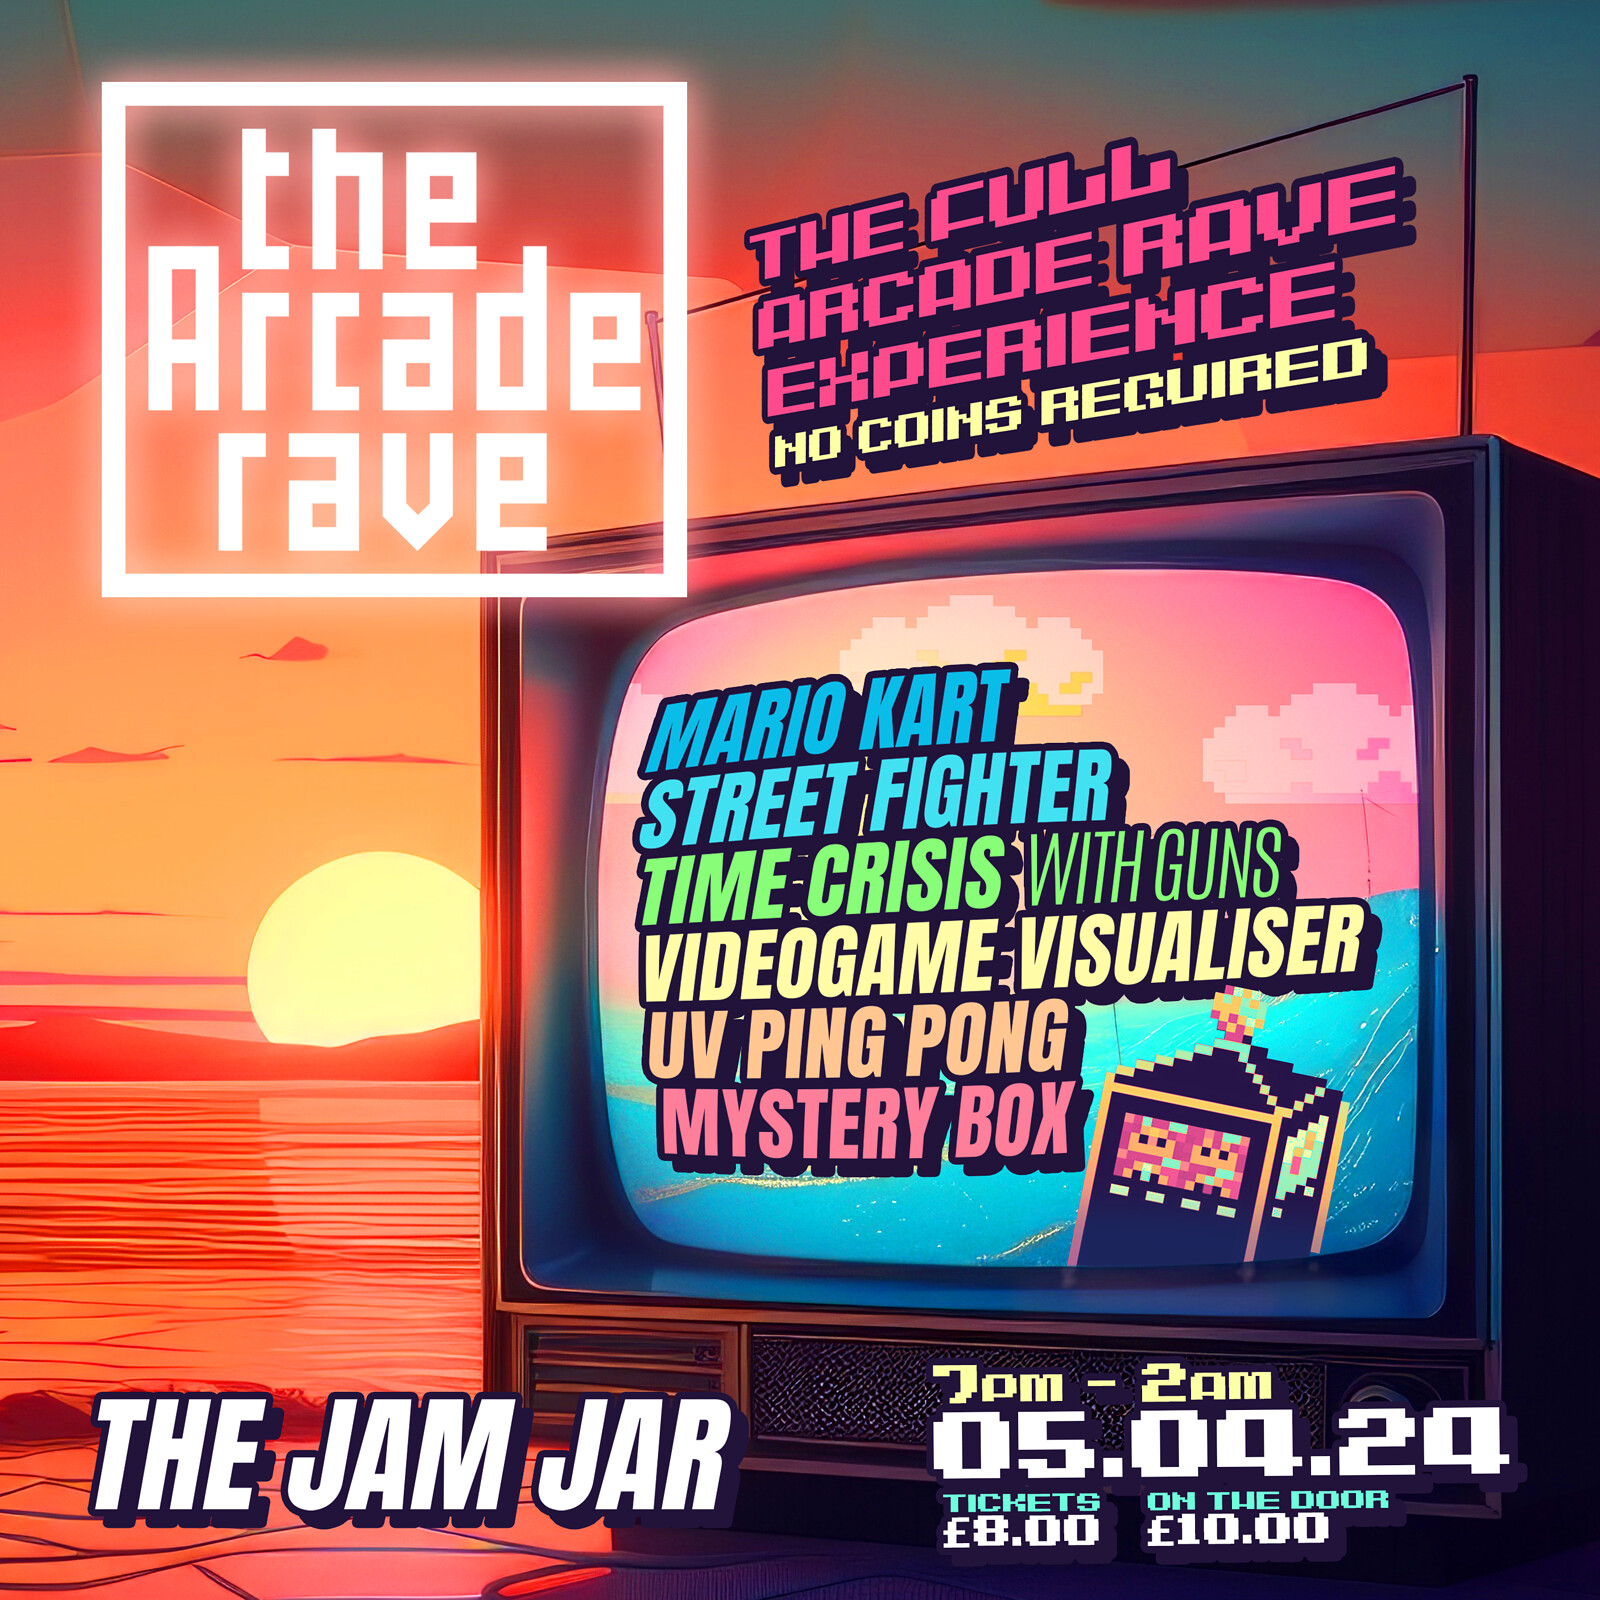 The ARCADE RAVE with MADAME ELECTRIFIE at The Jam Jar